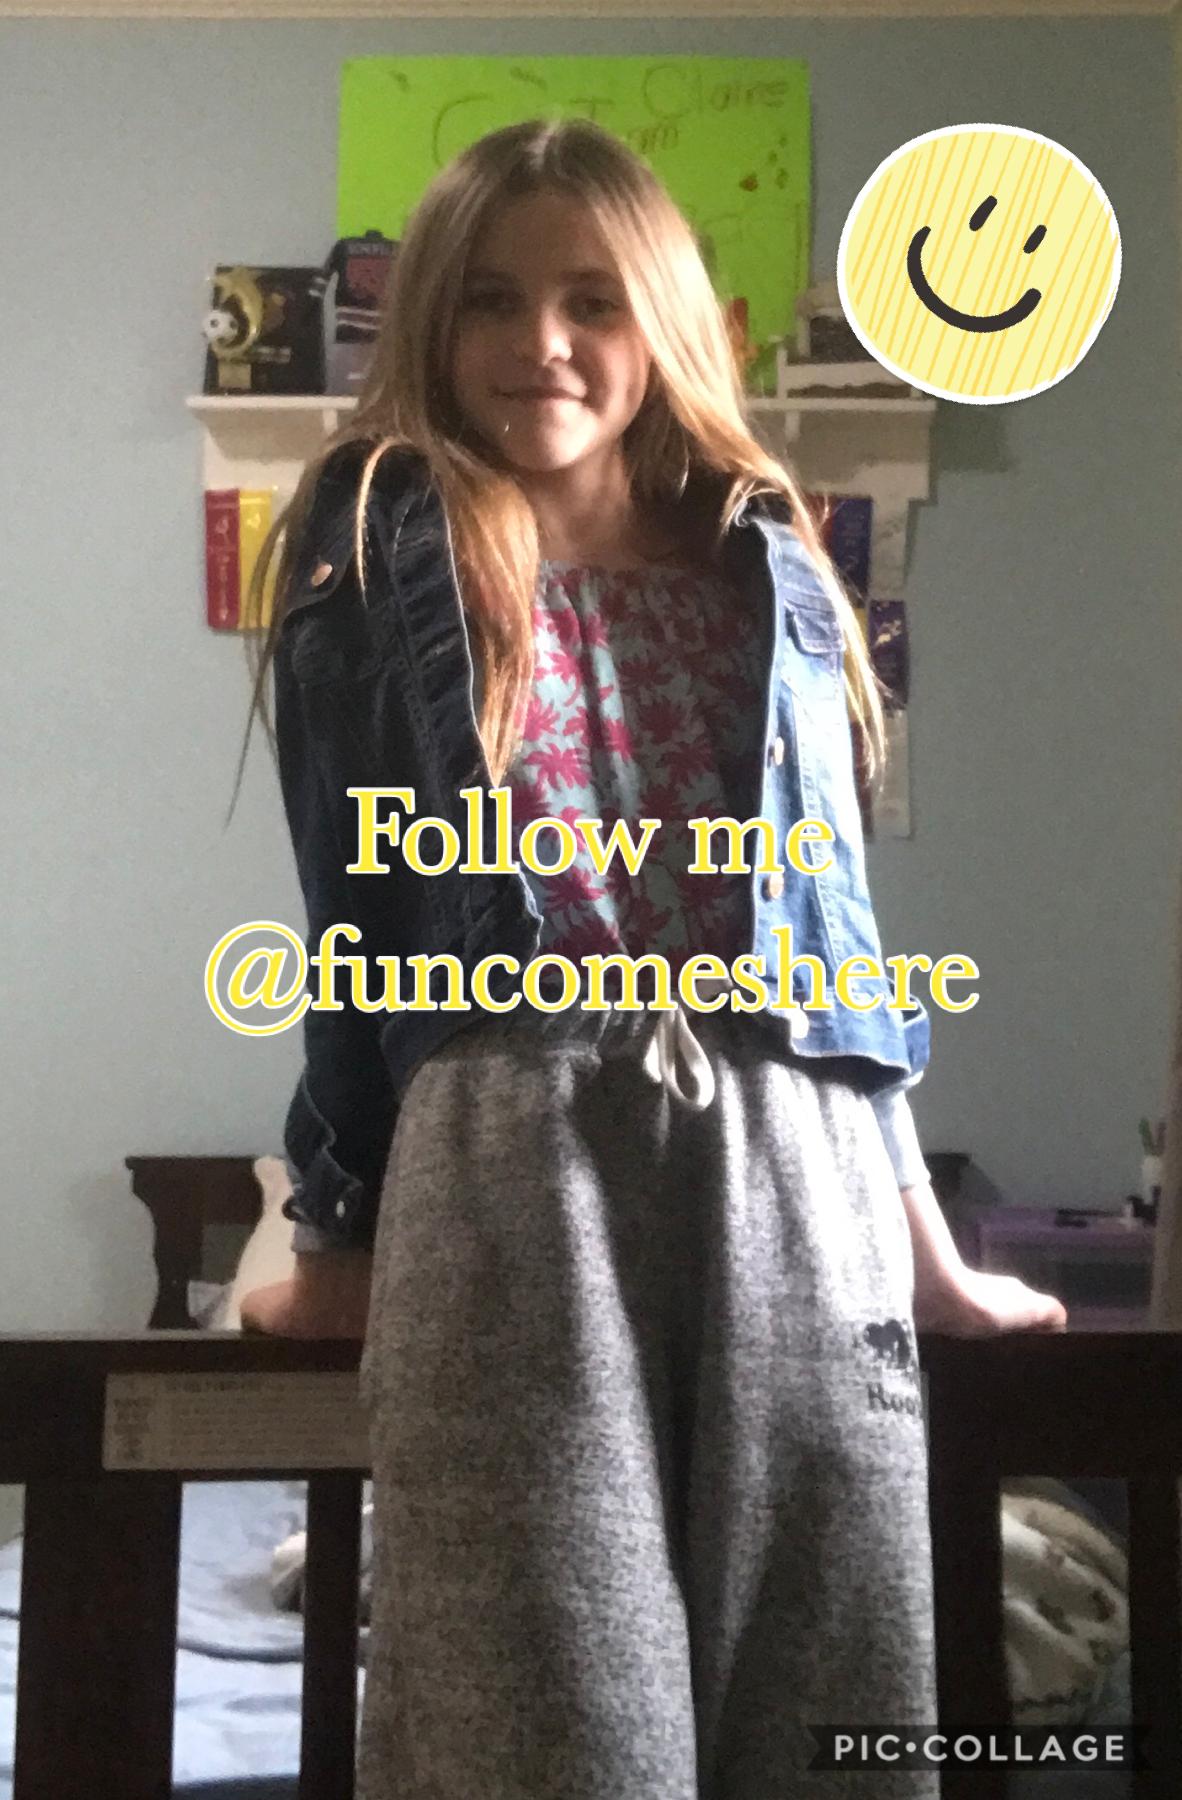 Didn’t know funcomeshere was going to be my name so can you tell me how to change it in the comments- follow me!!😇